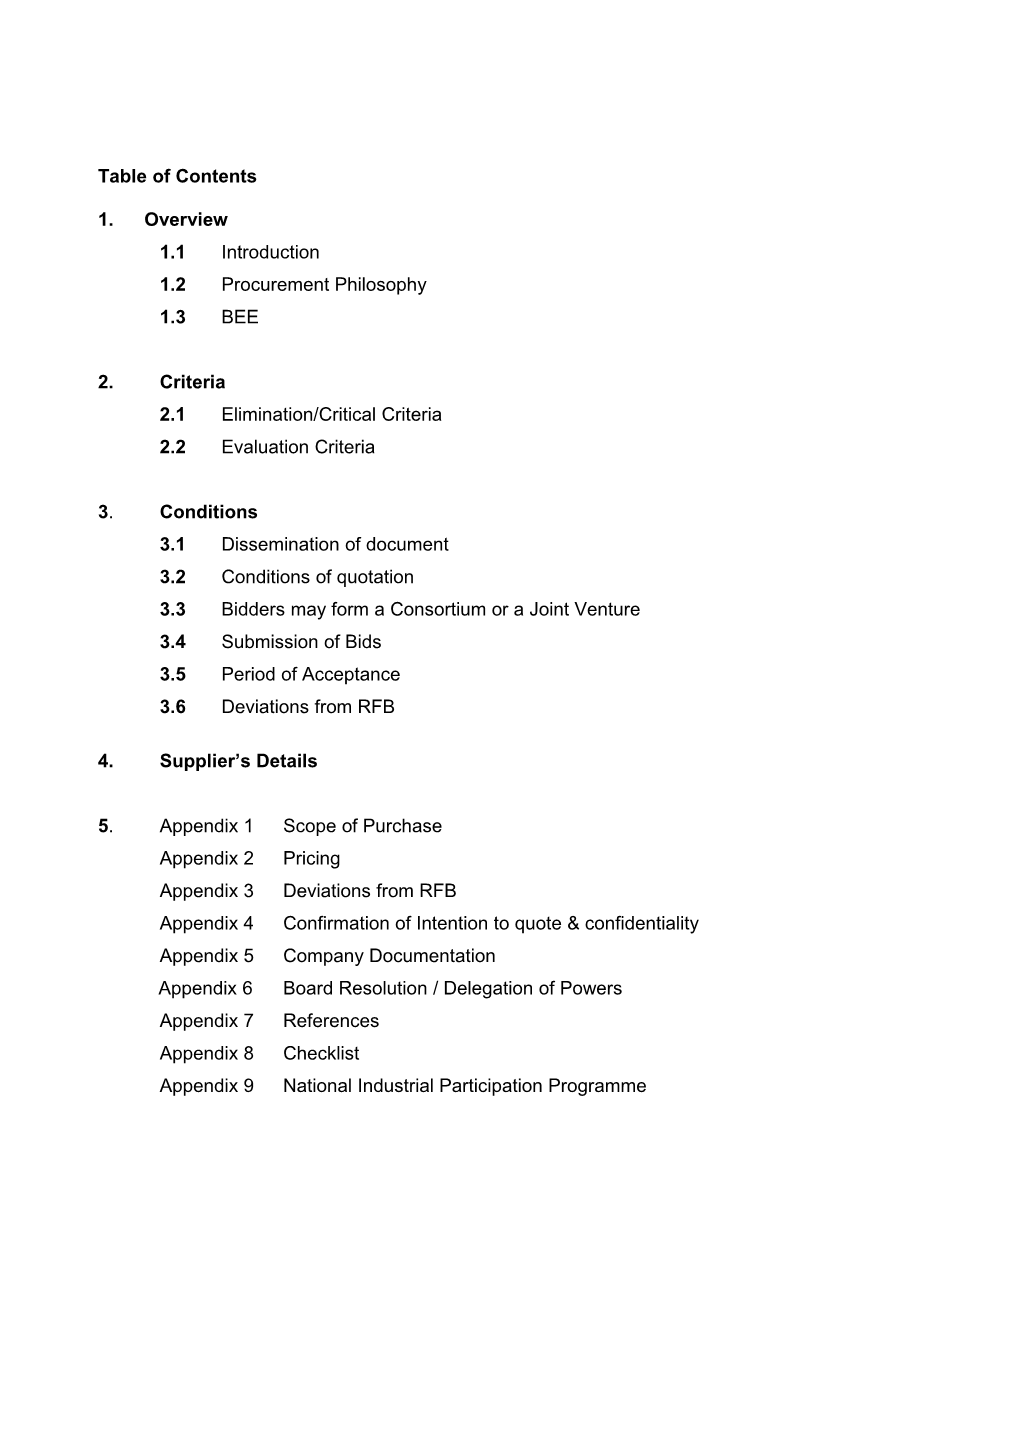 Table of Contents s476